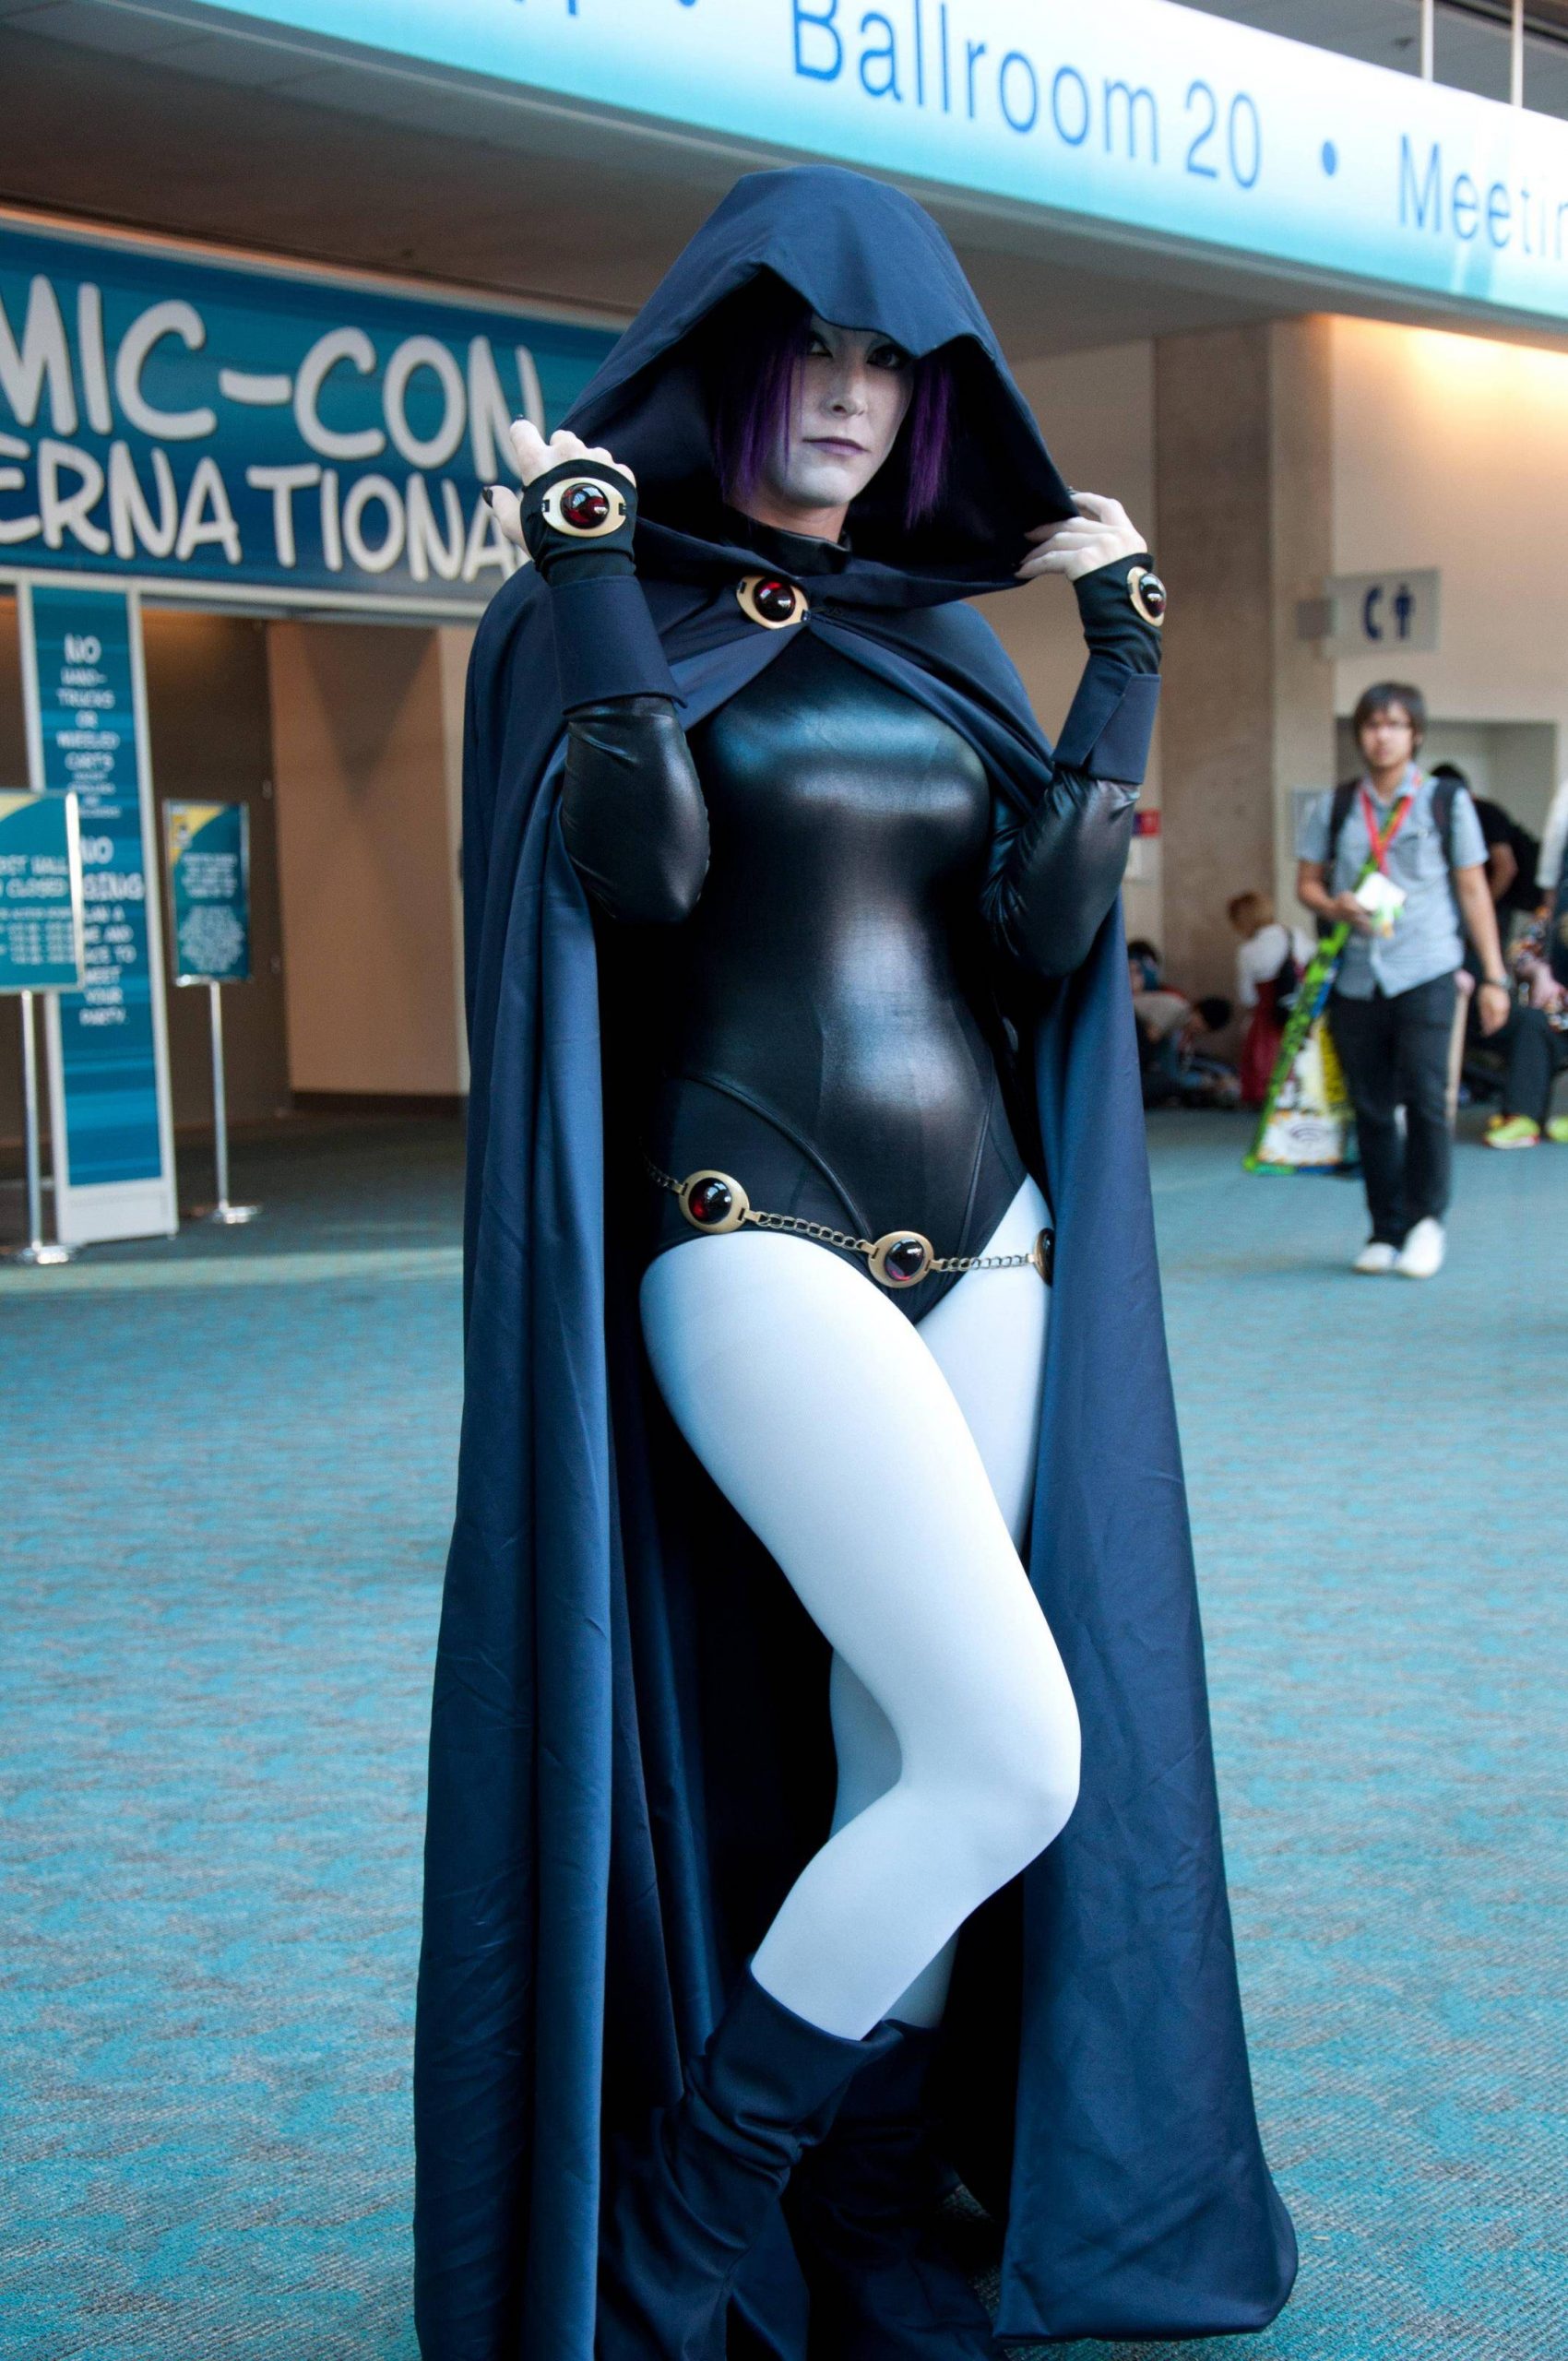 50+ Hot Pictures Of Raven From Teen Titans, DC Comics. 25